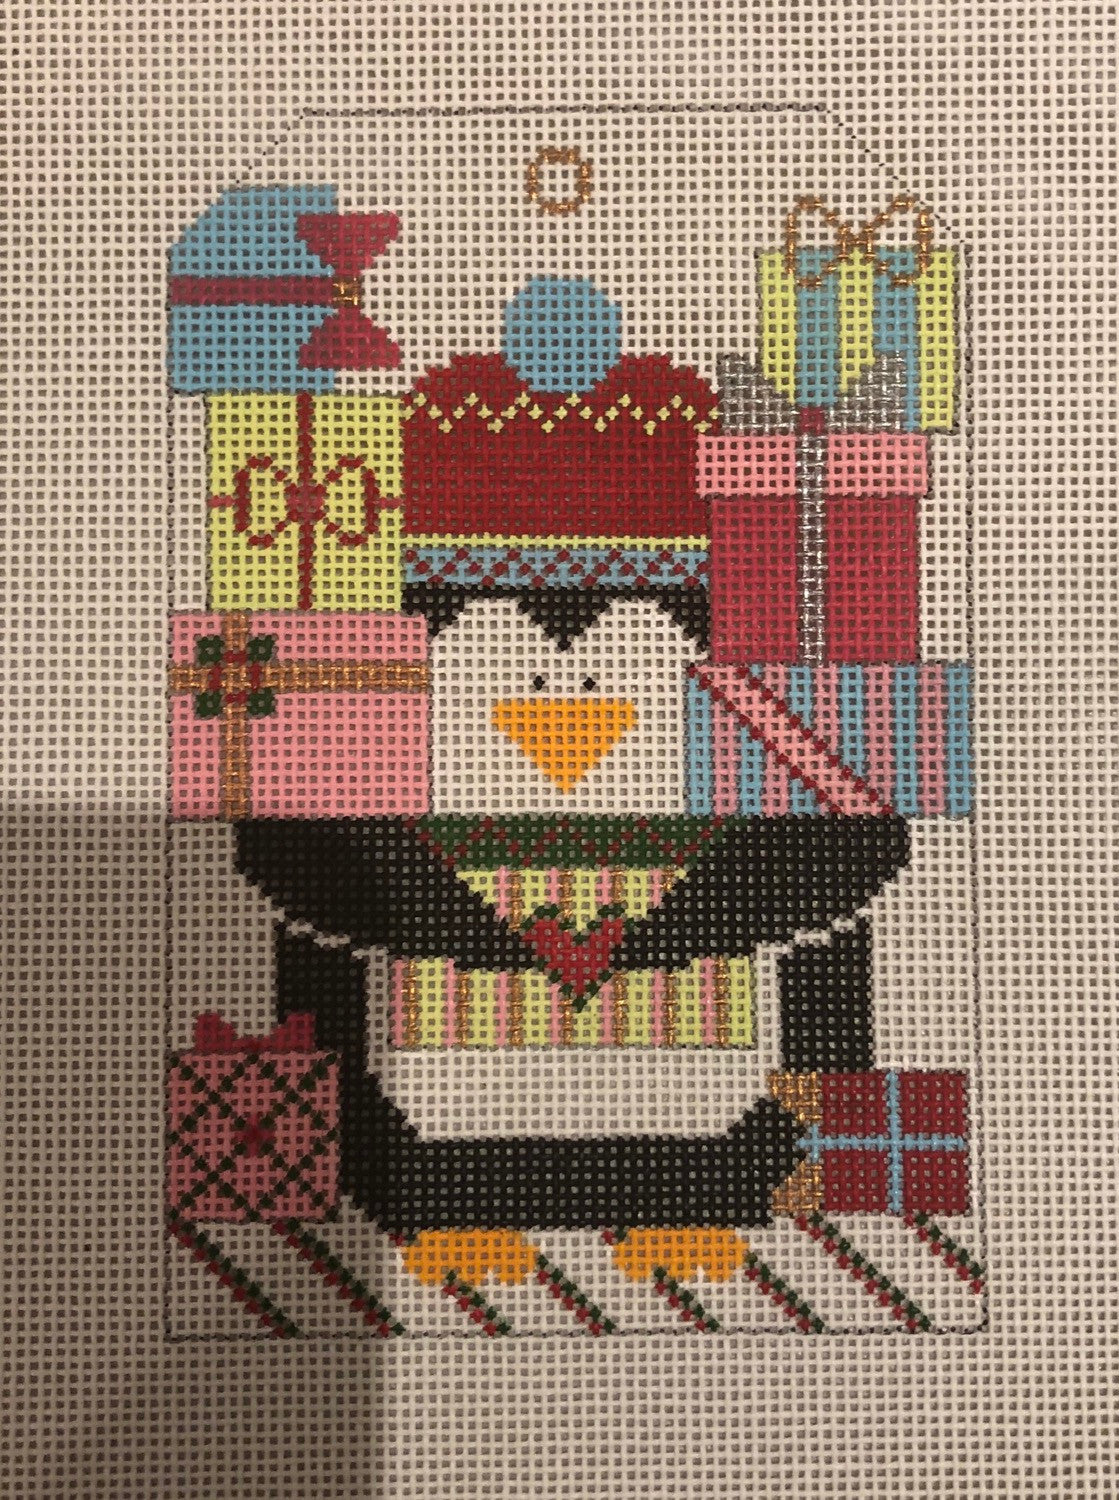 Penguin gift tag